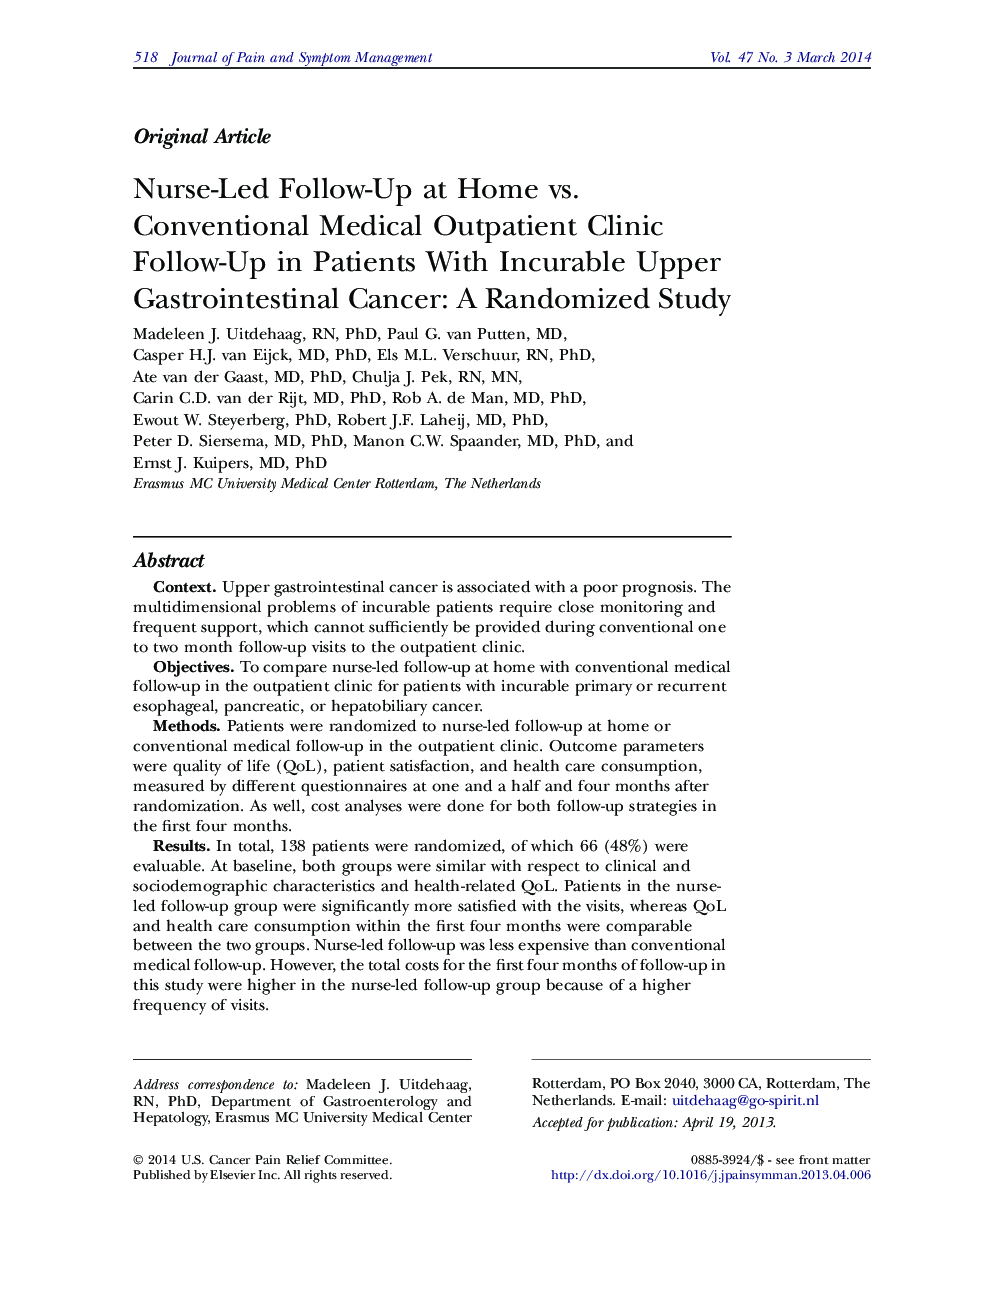 Nurse-Led Follow-Up at Home vs. Conventional Medical Outpatient Clinic Follow-Up in Patients With Incurable Upper Gastrointestinal Cancer: A Randomized Study